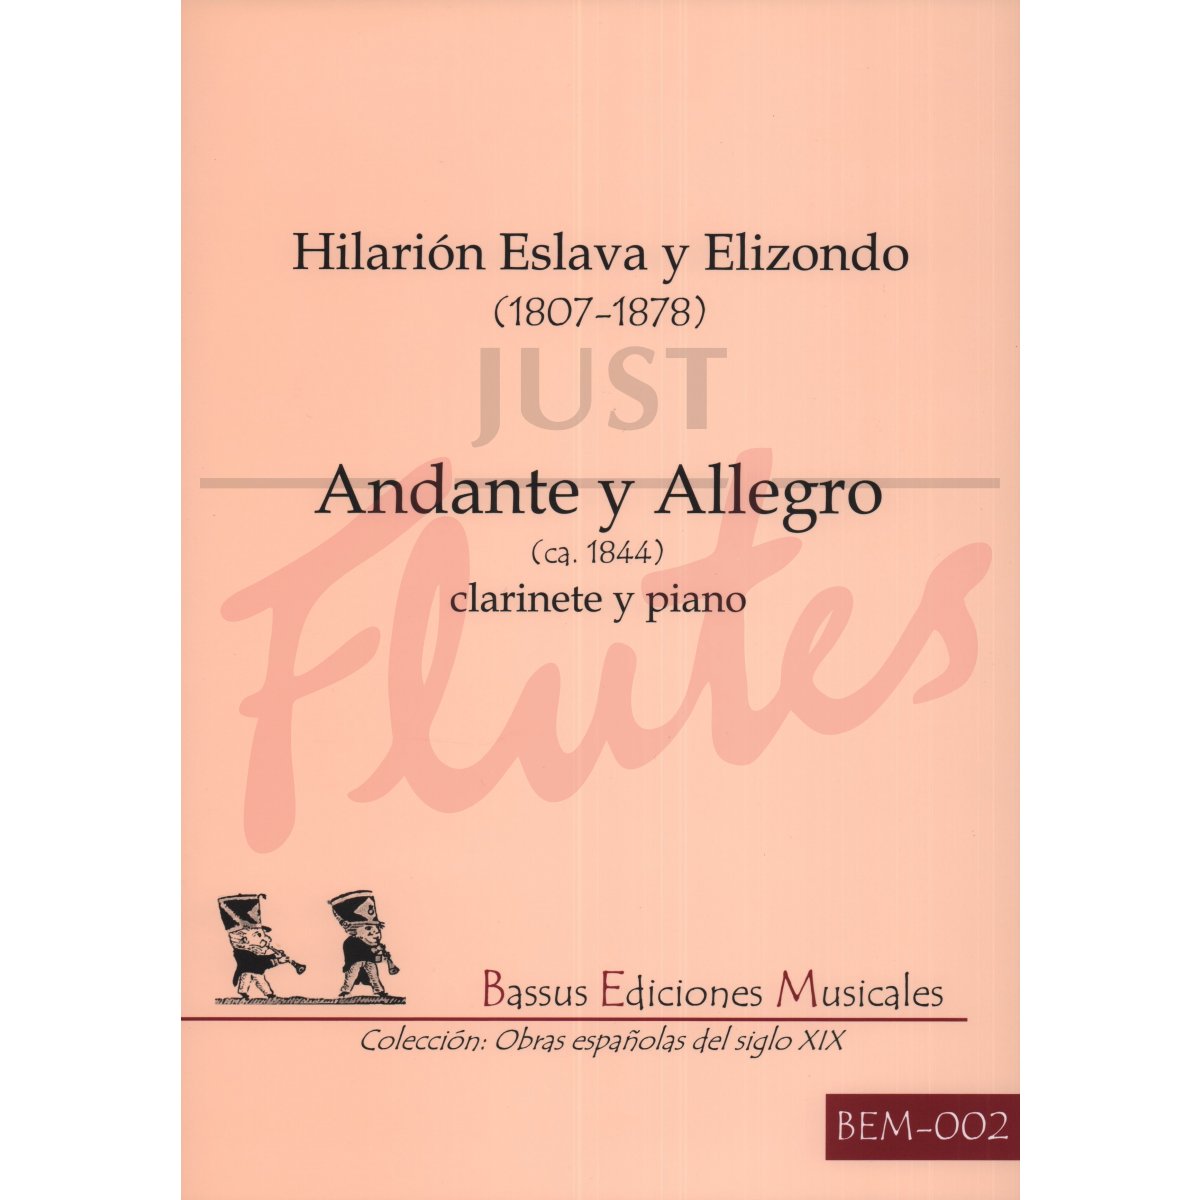 Andante y Allegro for Clarinet and Piano